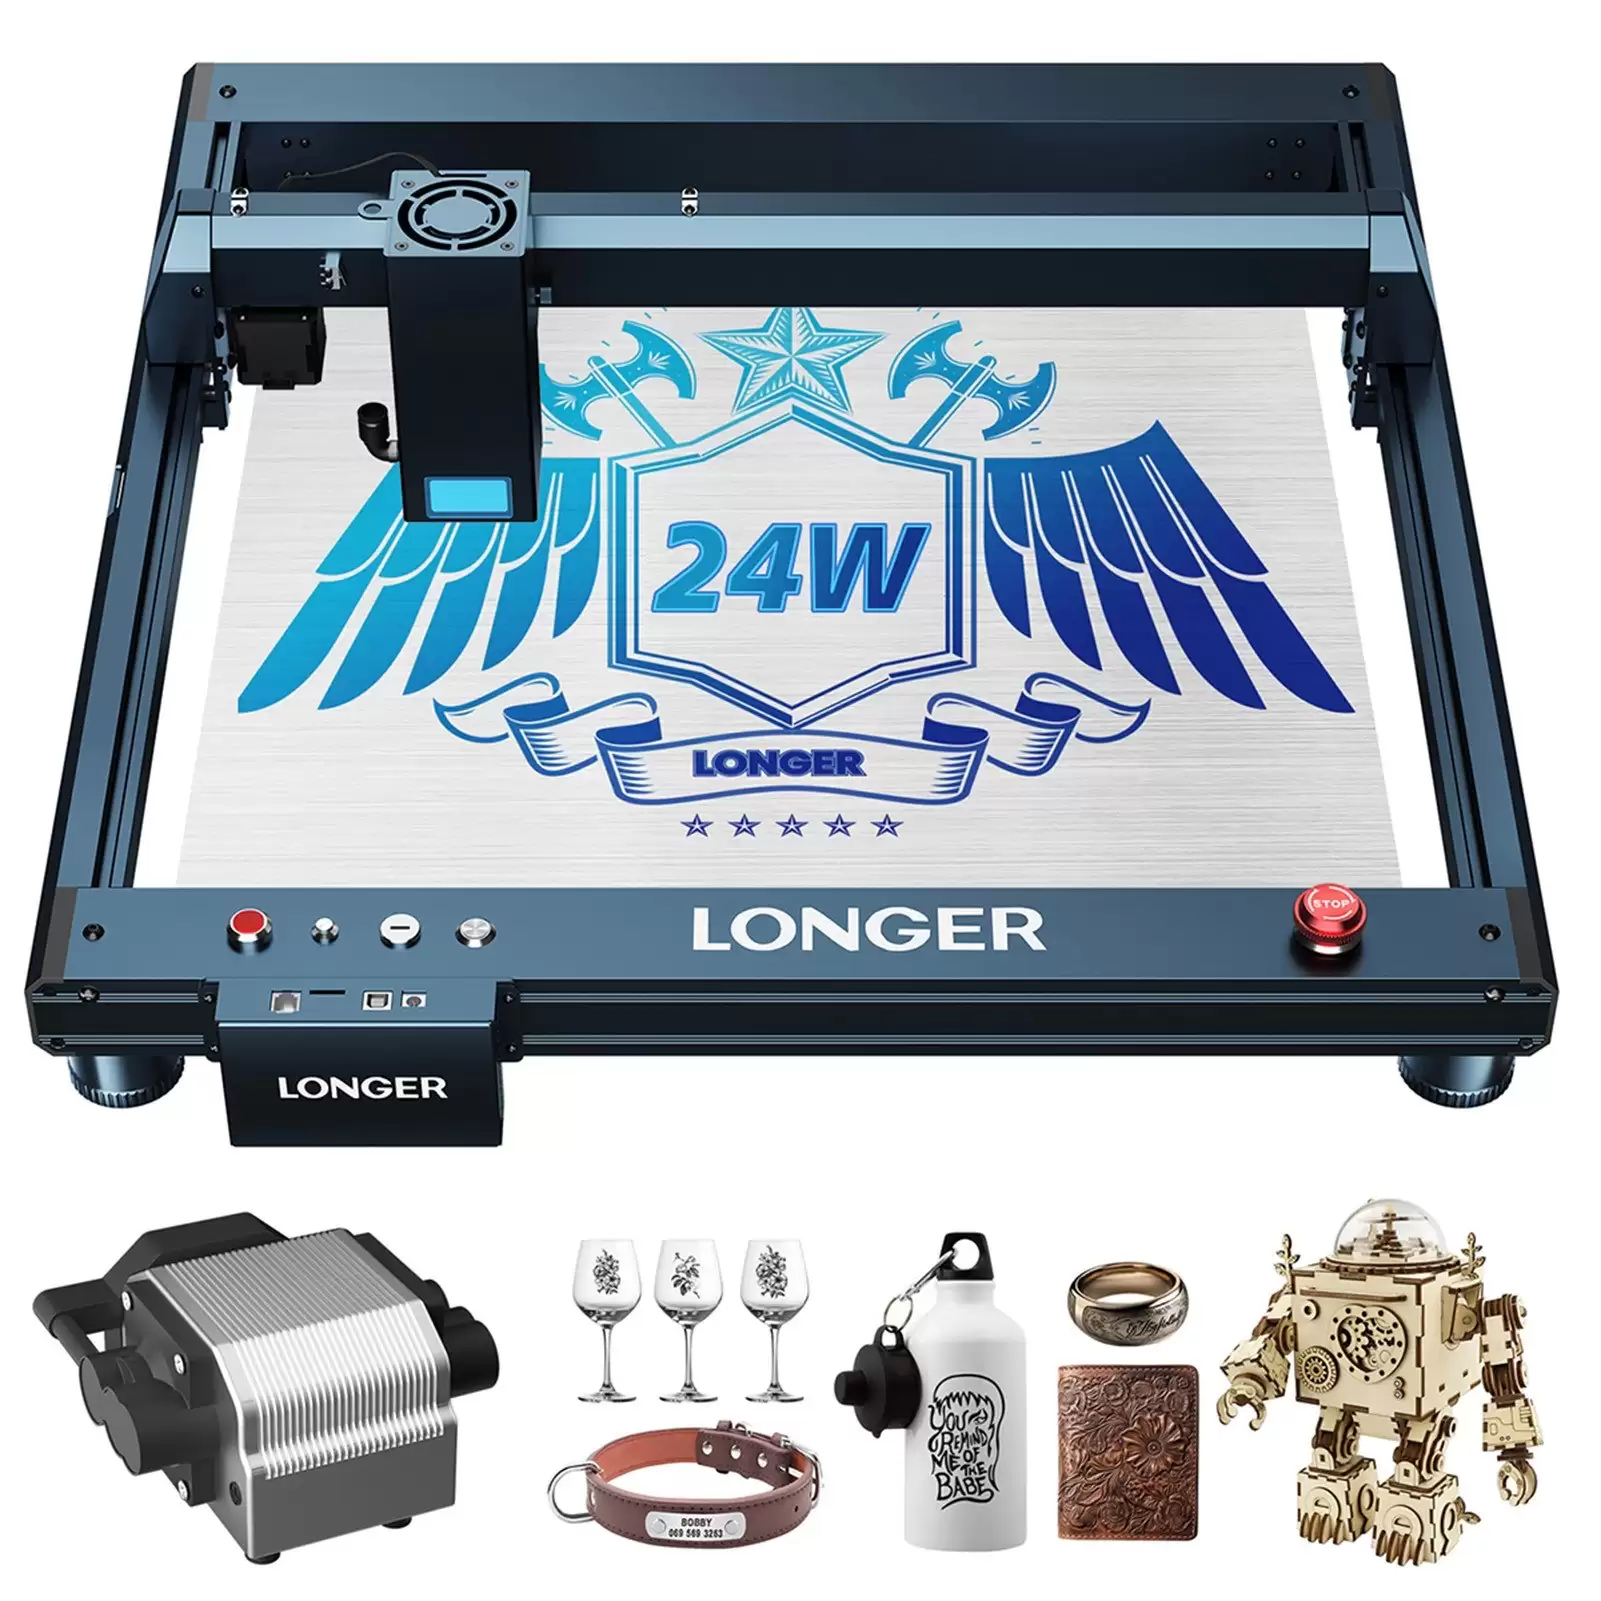 Pay Only $535 For Longer Laser B1 20w Laser Engraver 24w Laser Power With This Discount Coupon At Cafago